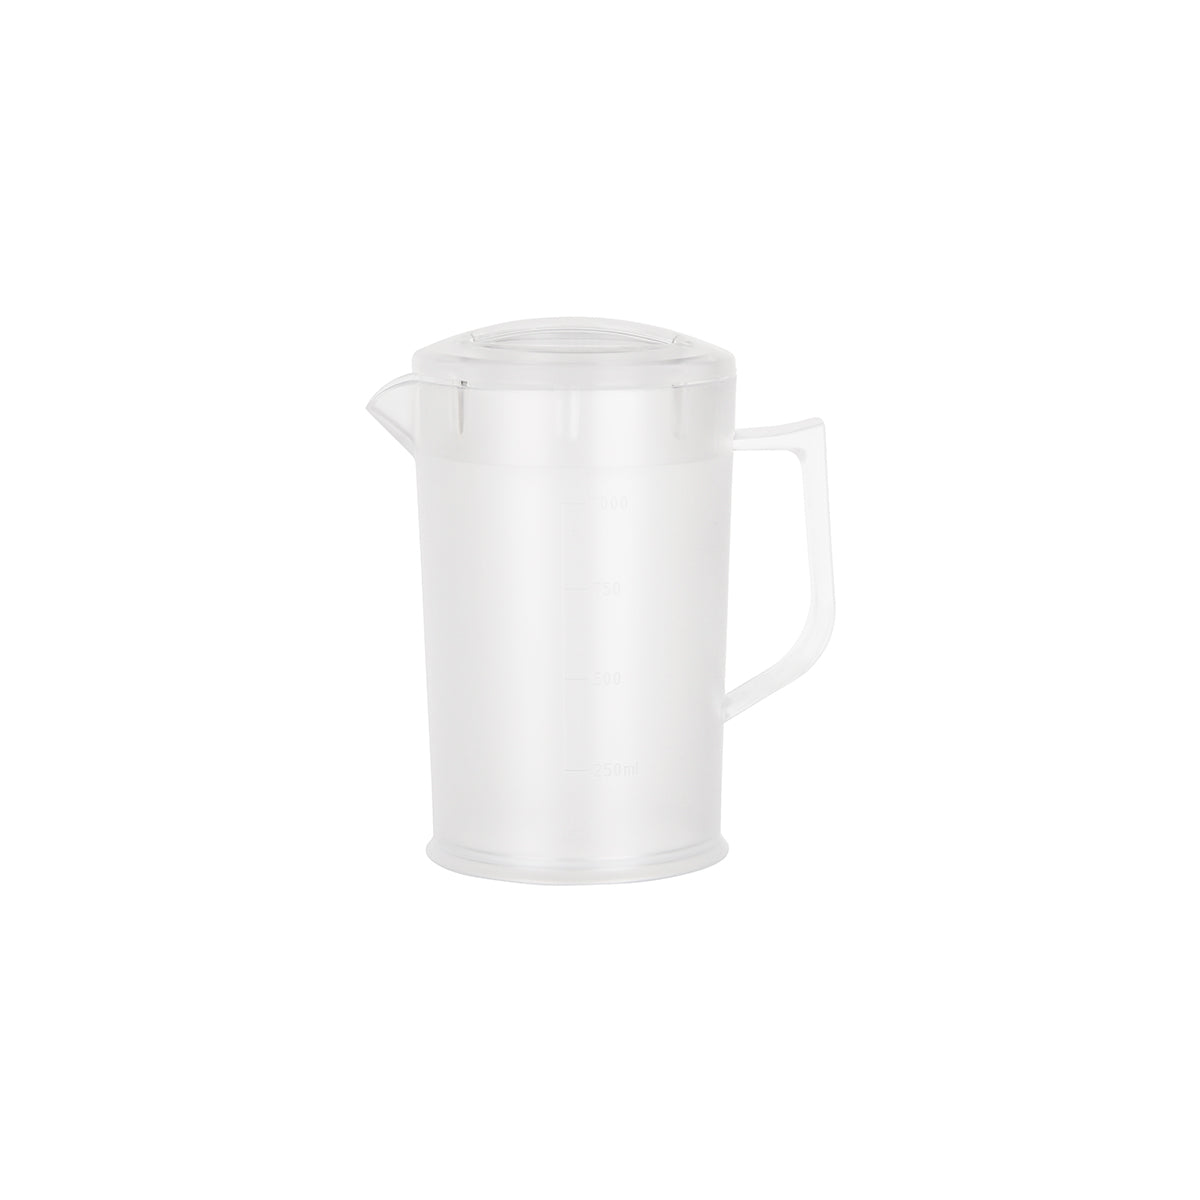 71202 Chef Inox Pitcher Frosted Acrylic 1.0Lt Tomkin Australia Hospitality Supplies